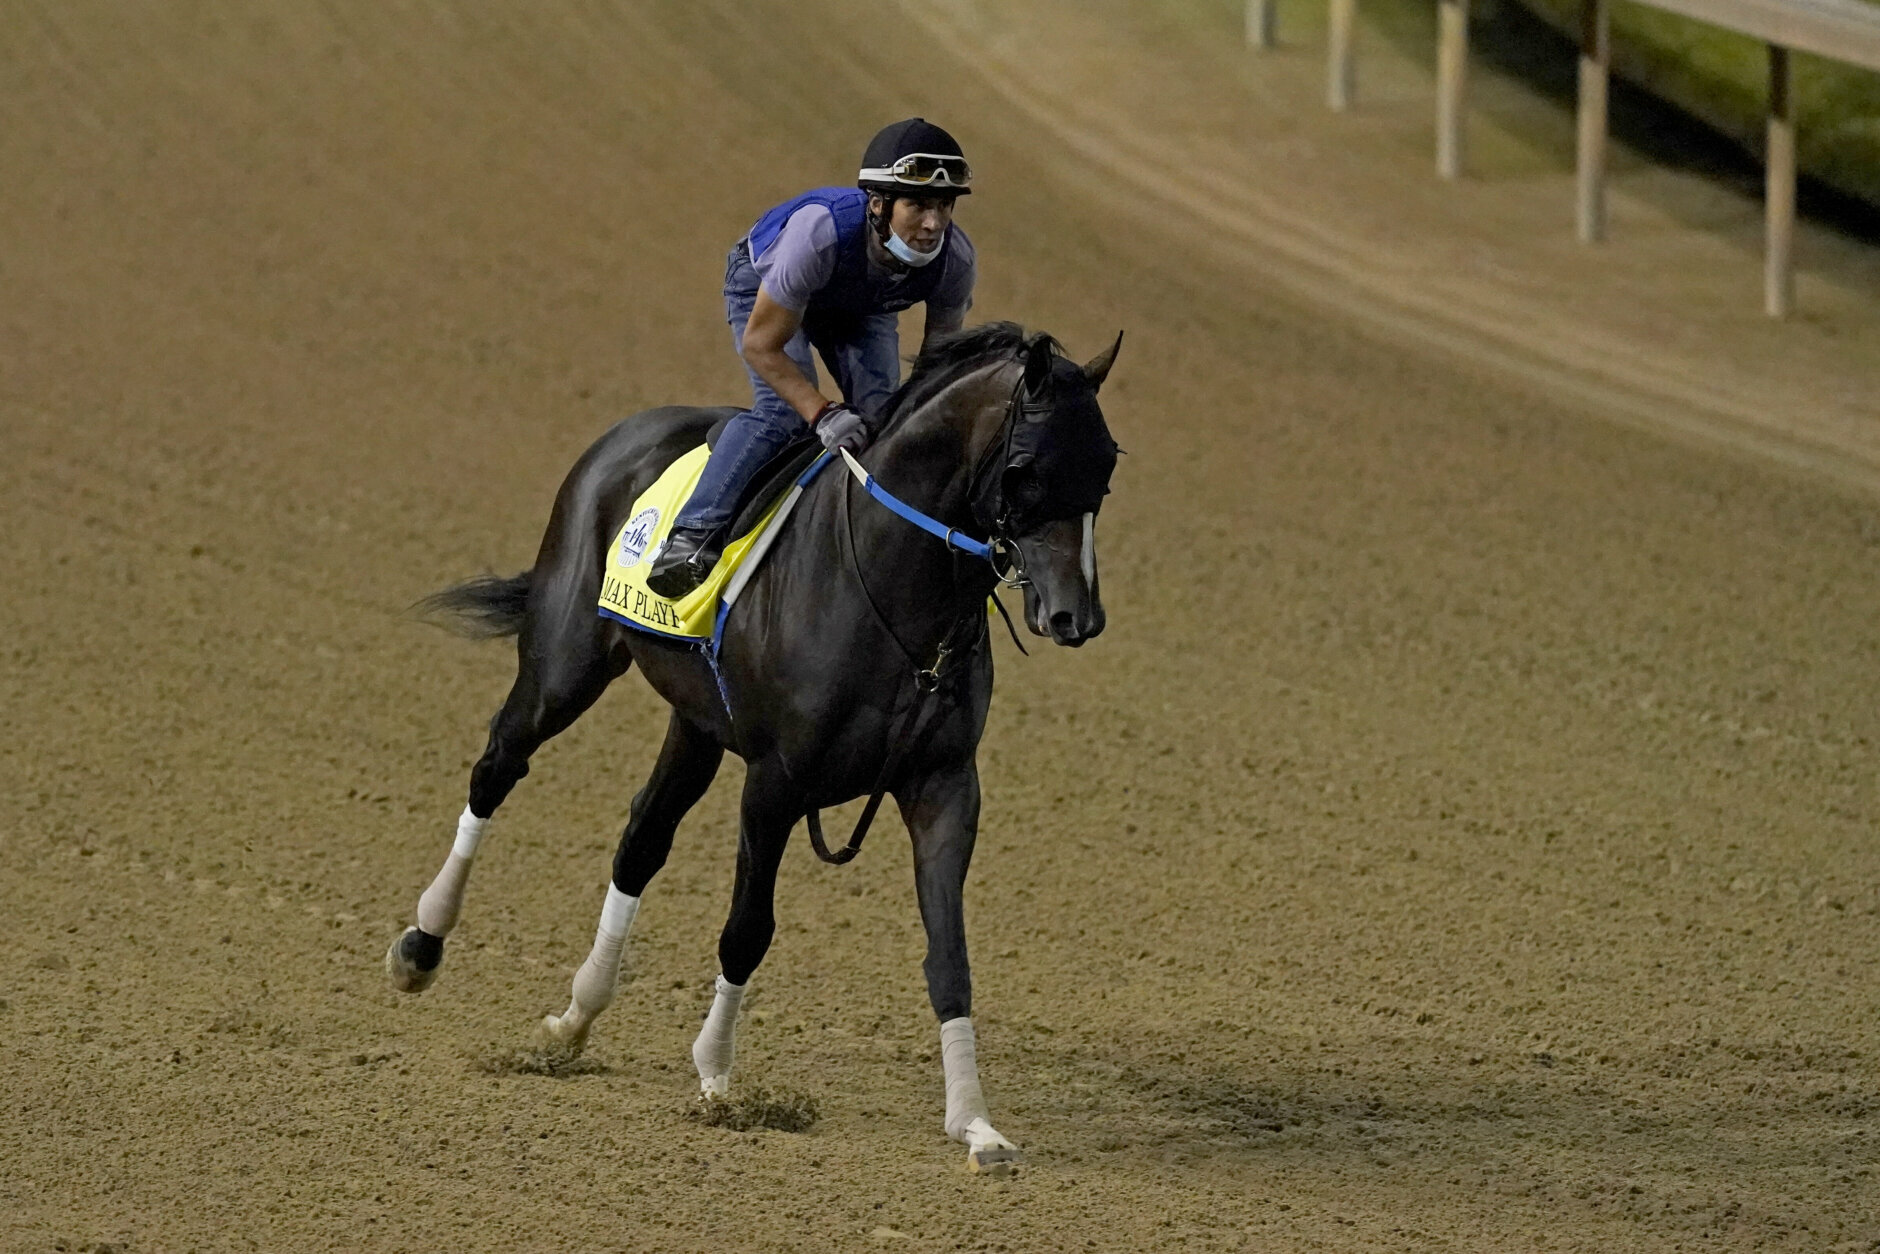 Kentucky Derby entry Max Player runs during an early morning workout at Churchill Downs, Friday, Sept. 4, 2020, in Louisville, Ky. The Kentucky Derby is scheduled for Saturday, Sept. 5th. (AP Photo/Charlie Riedel)